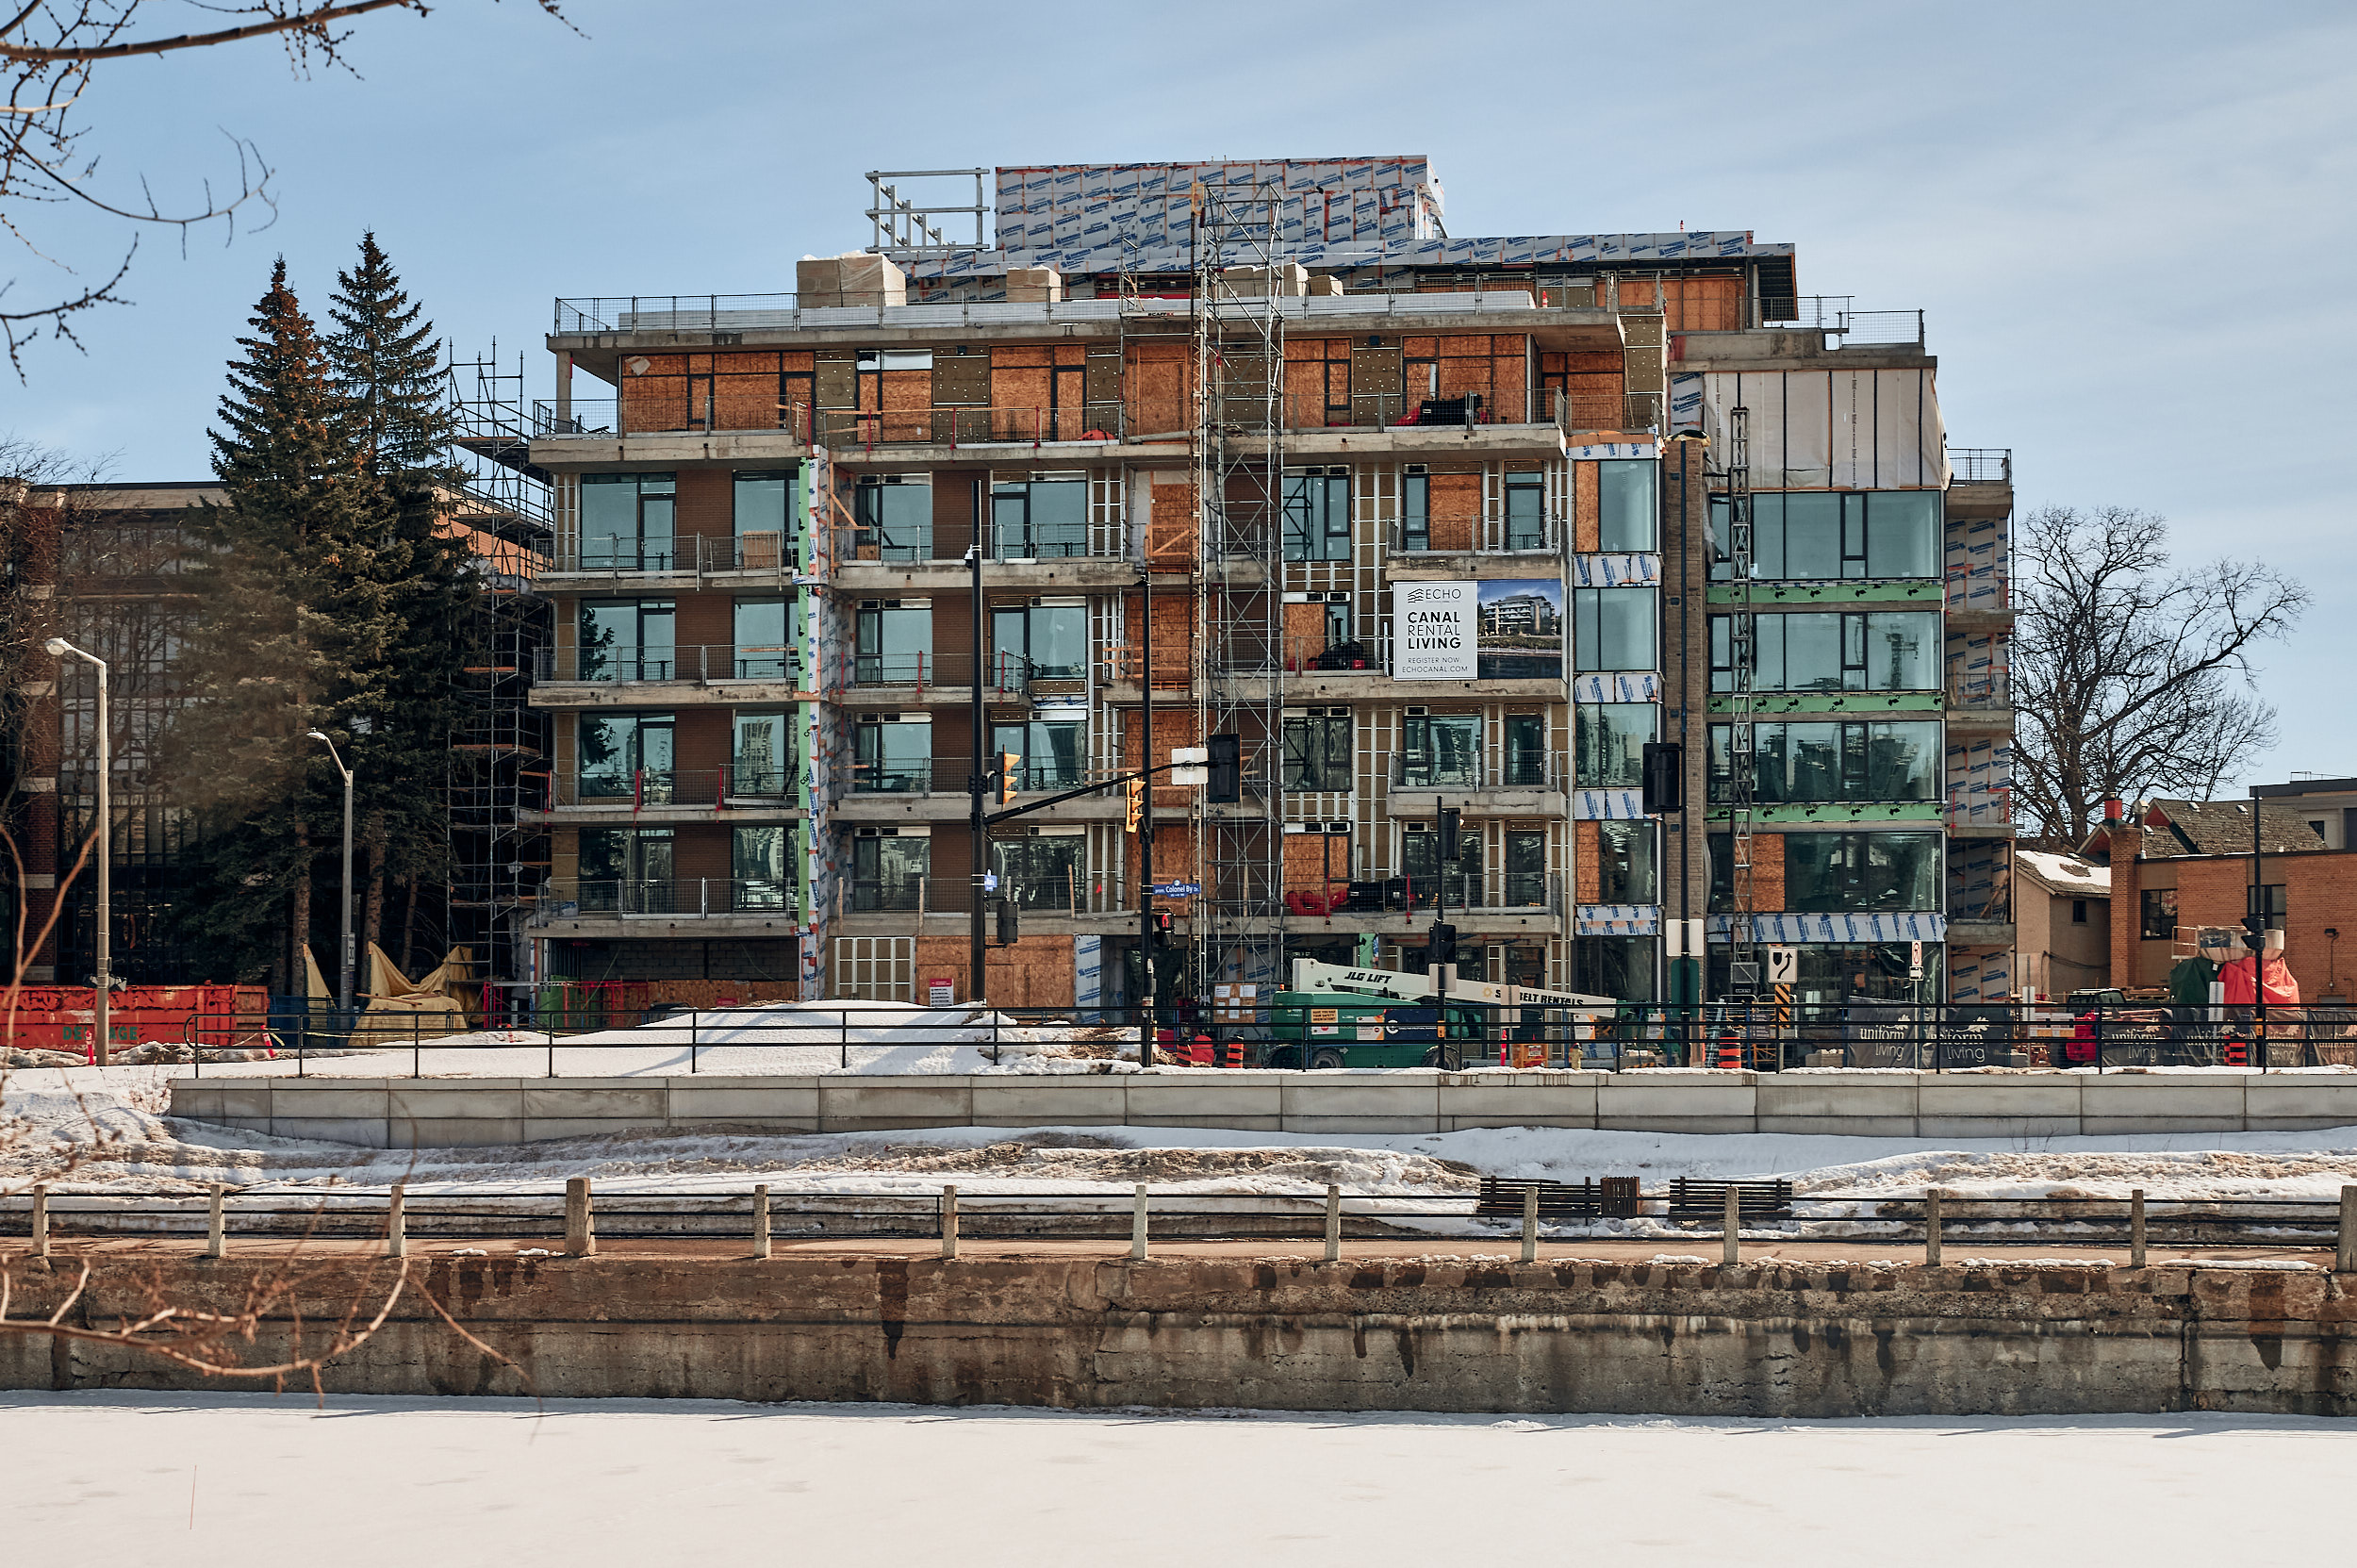 Echo Condo Building overlooking the Rideau Canal, with the tagline "Canal Rental Living" with a selling point of "The Rideau Canal offers a year-round opportunity to remain active and connected to the outdoors."